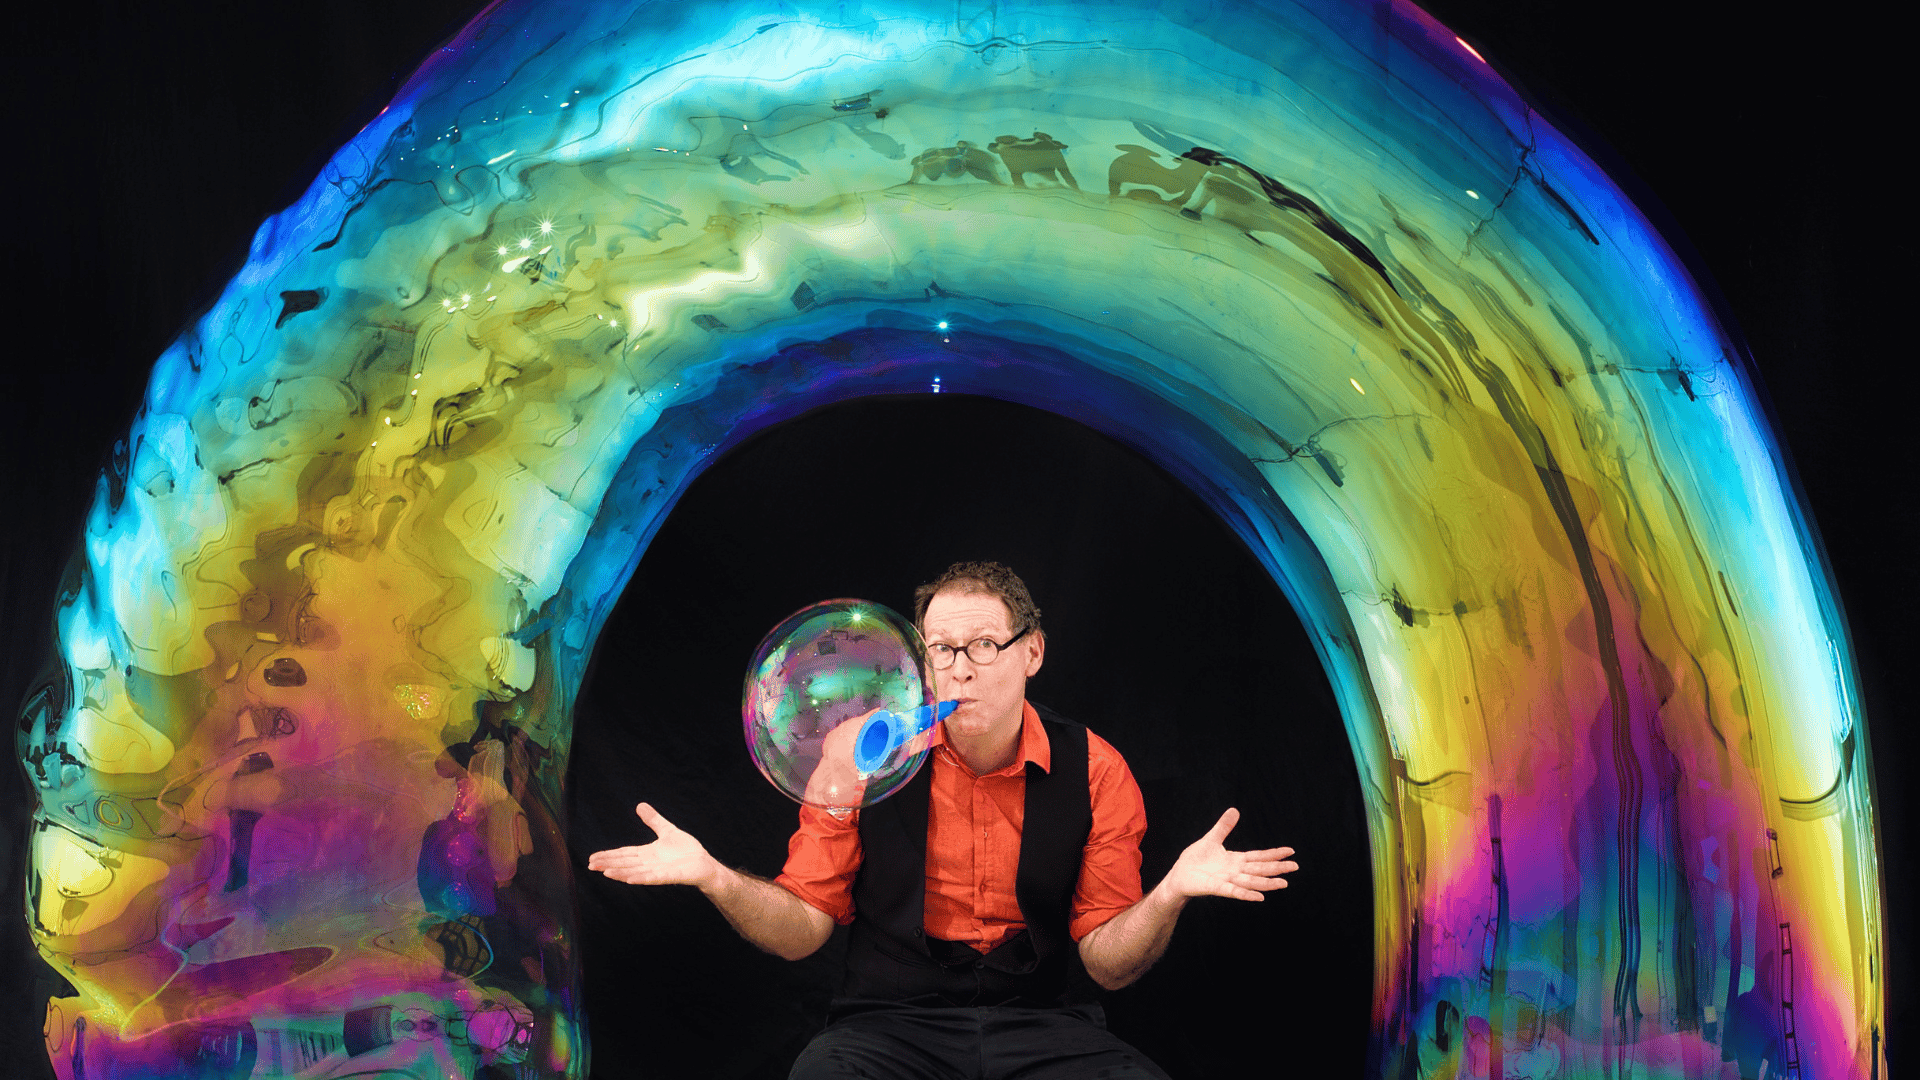 The Amazing Bubble Man has created a giant rainbow bubble over his head